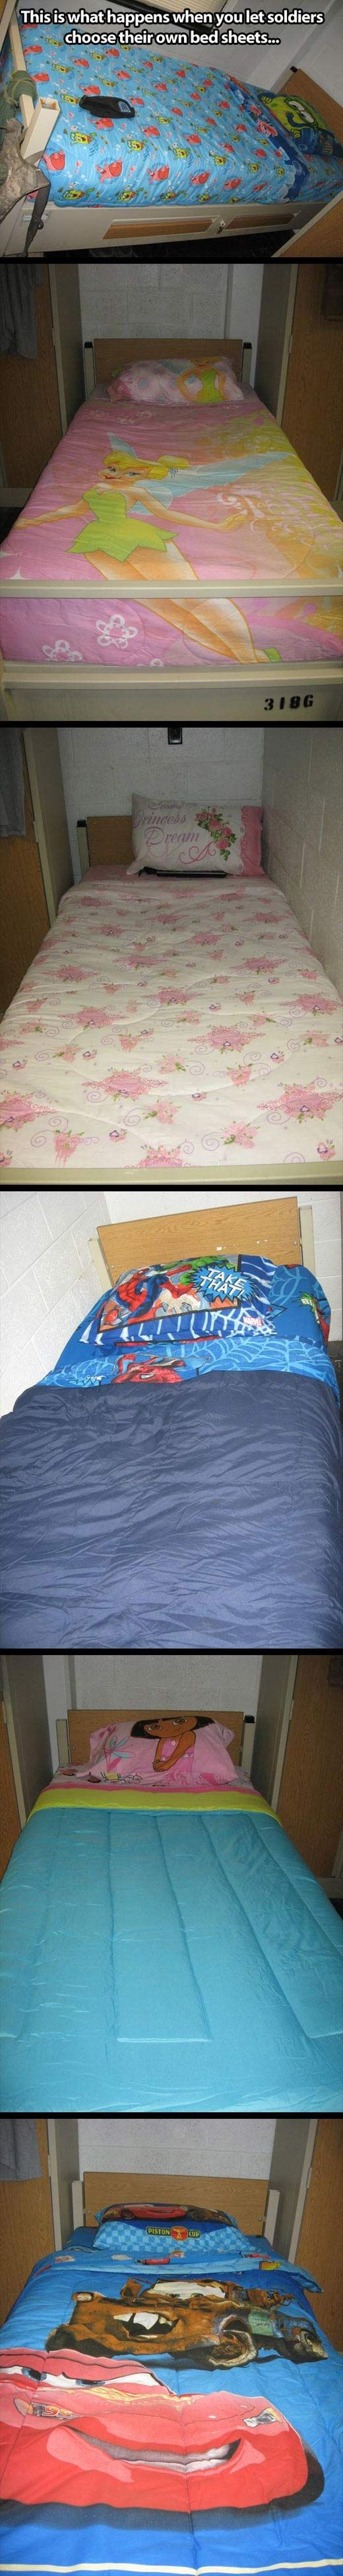 When soldiers choose their own bed sheets